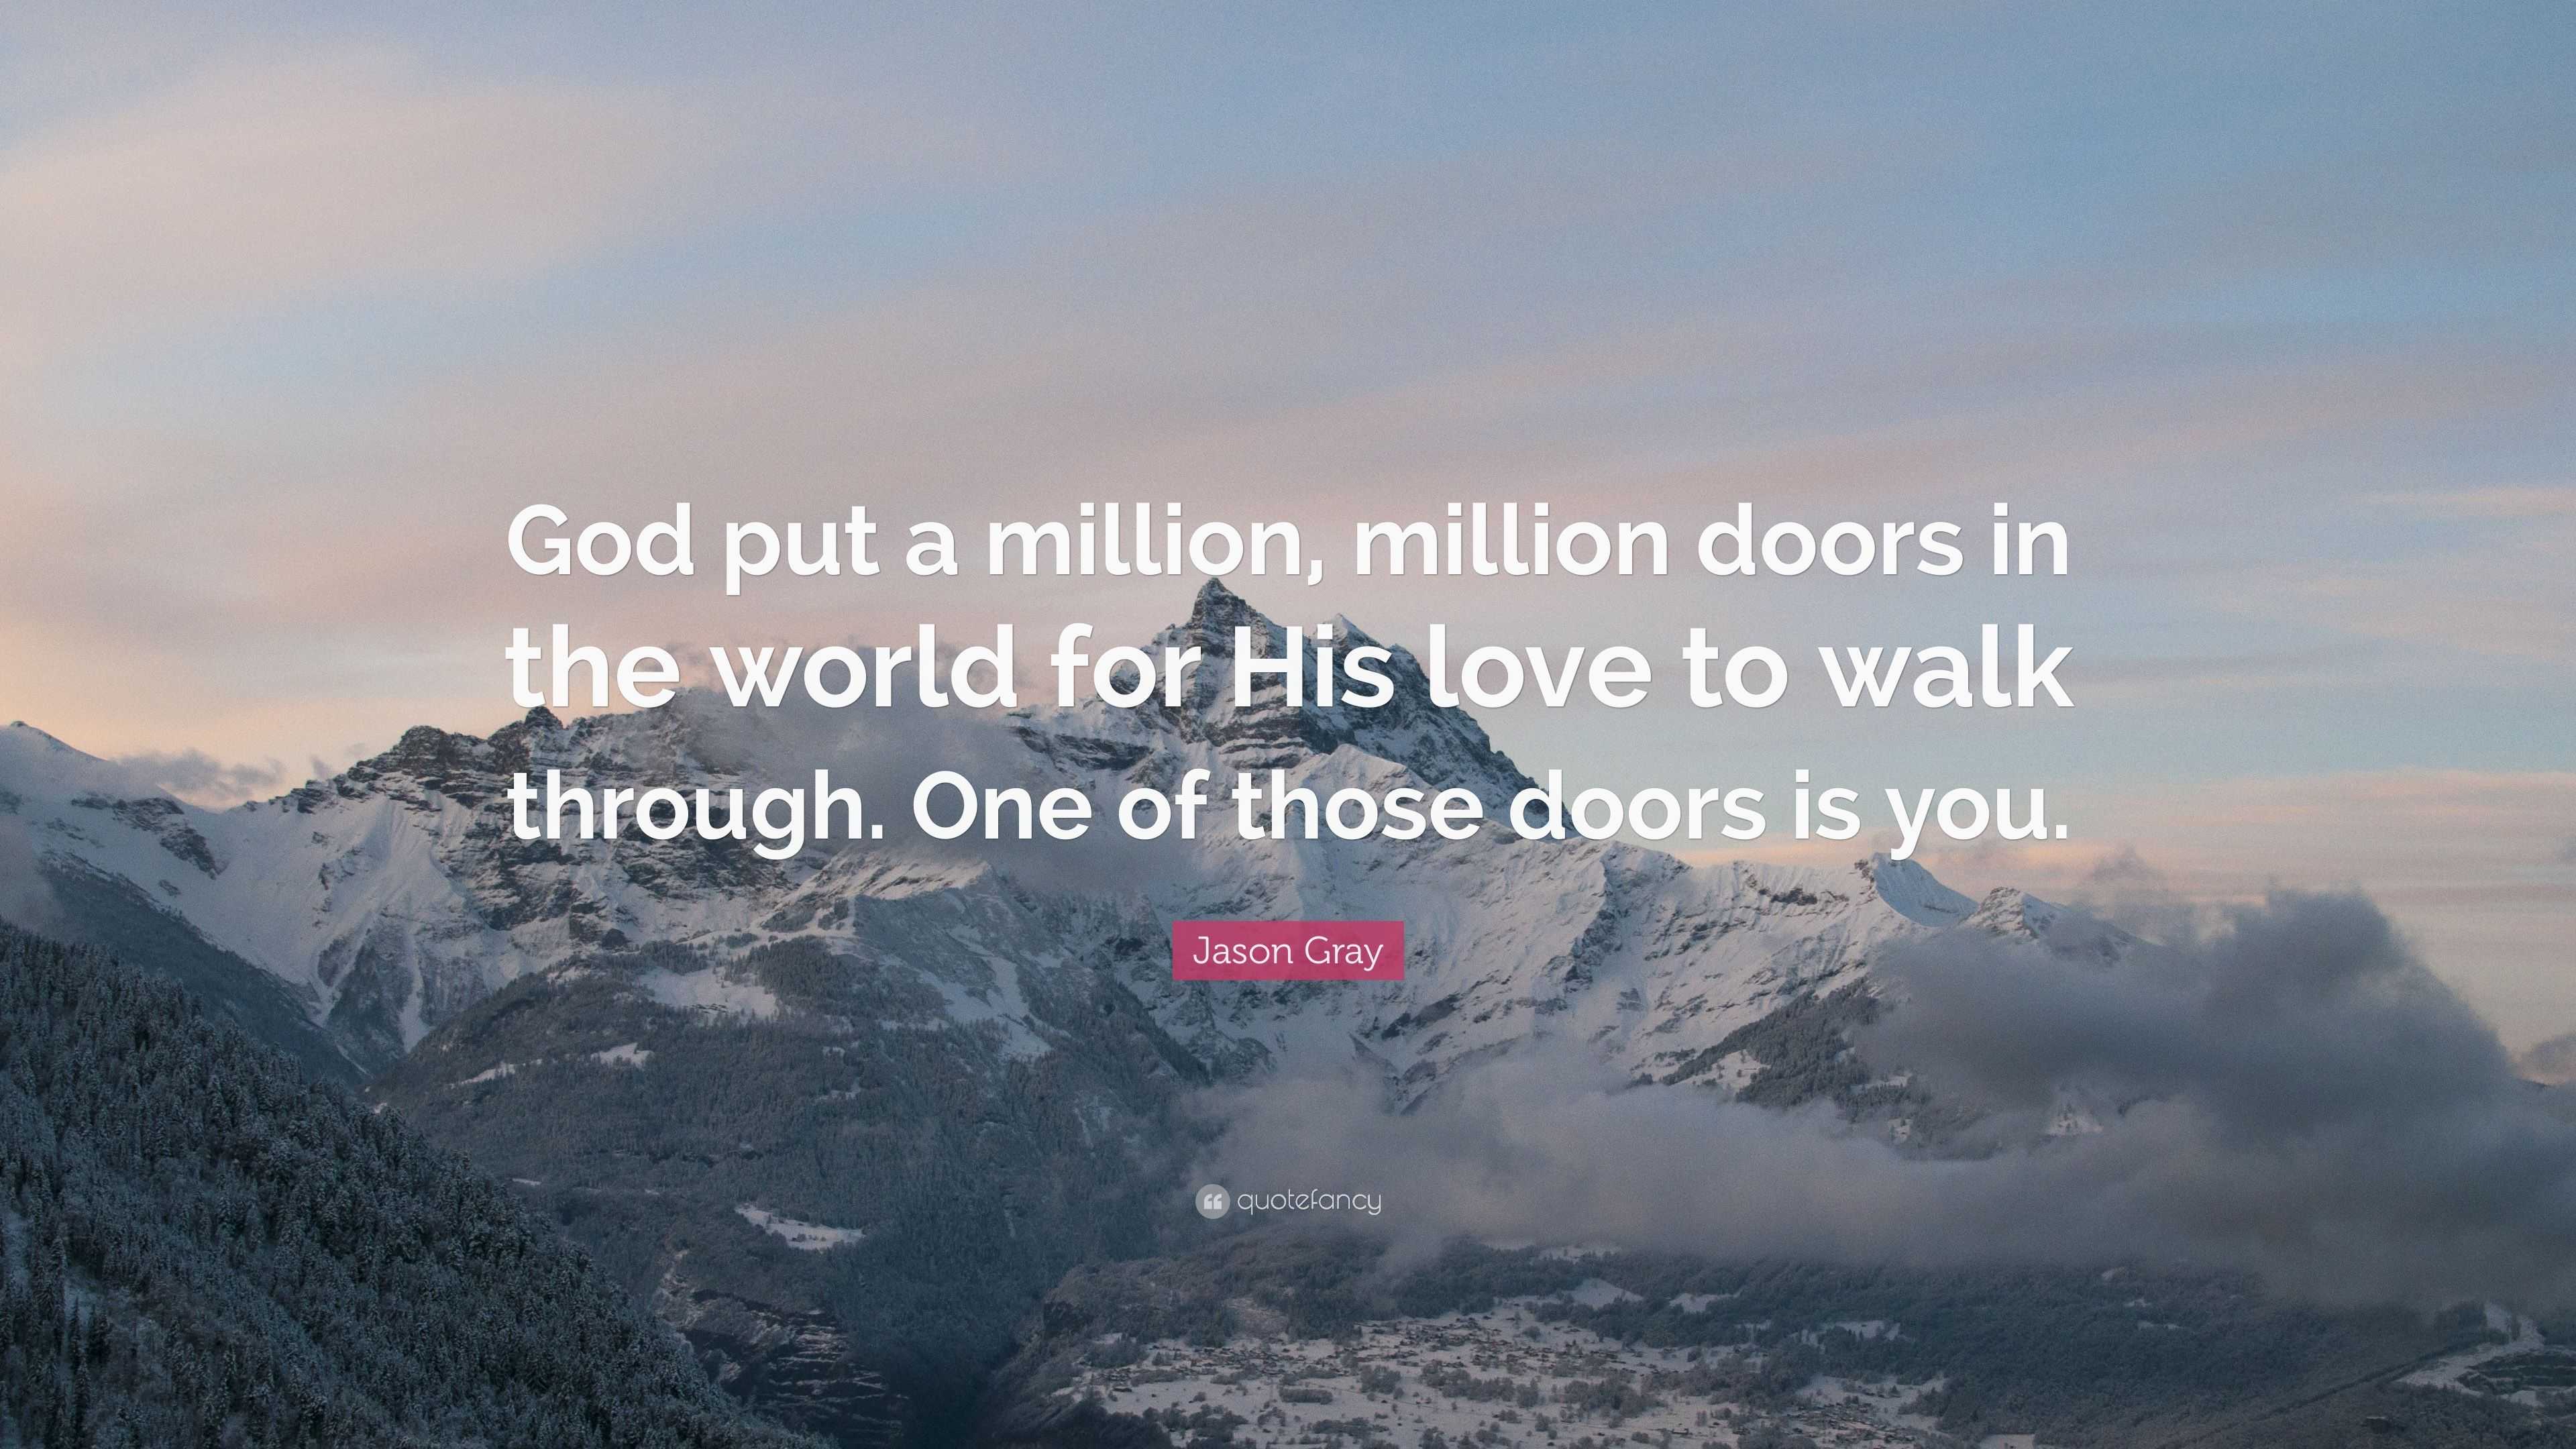 Jason Gray Quote “God put a million million doors in the world for